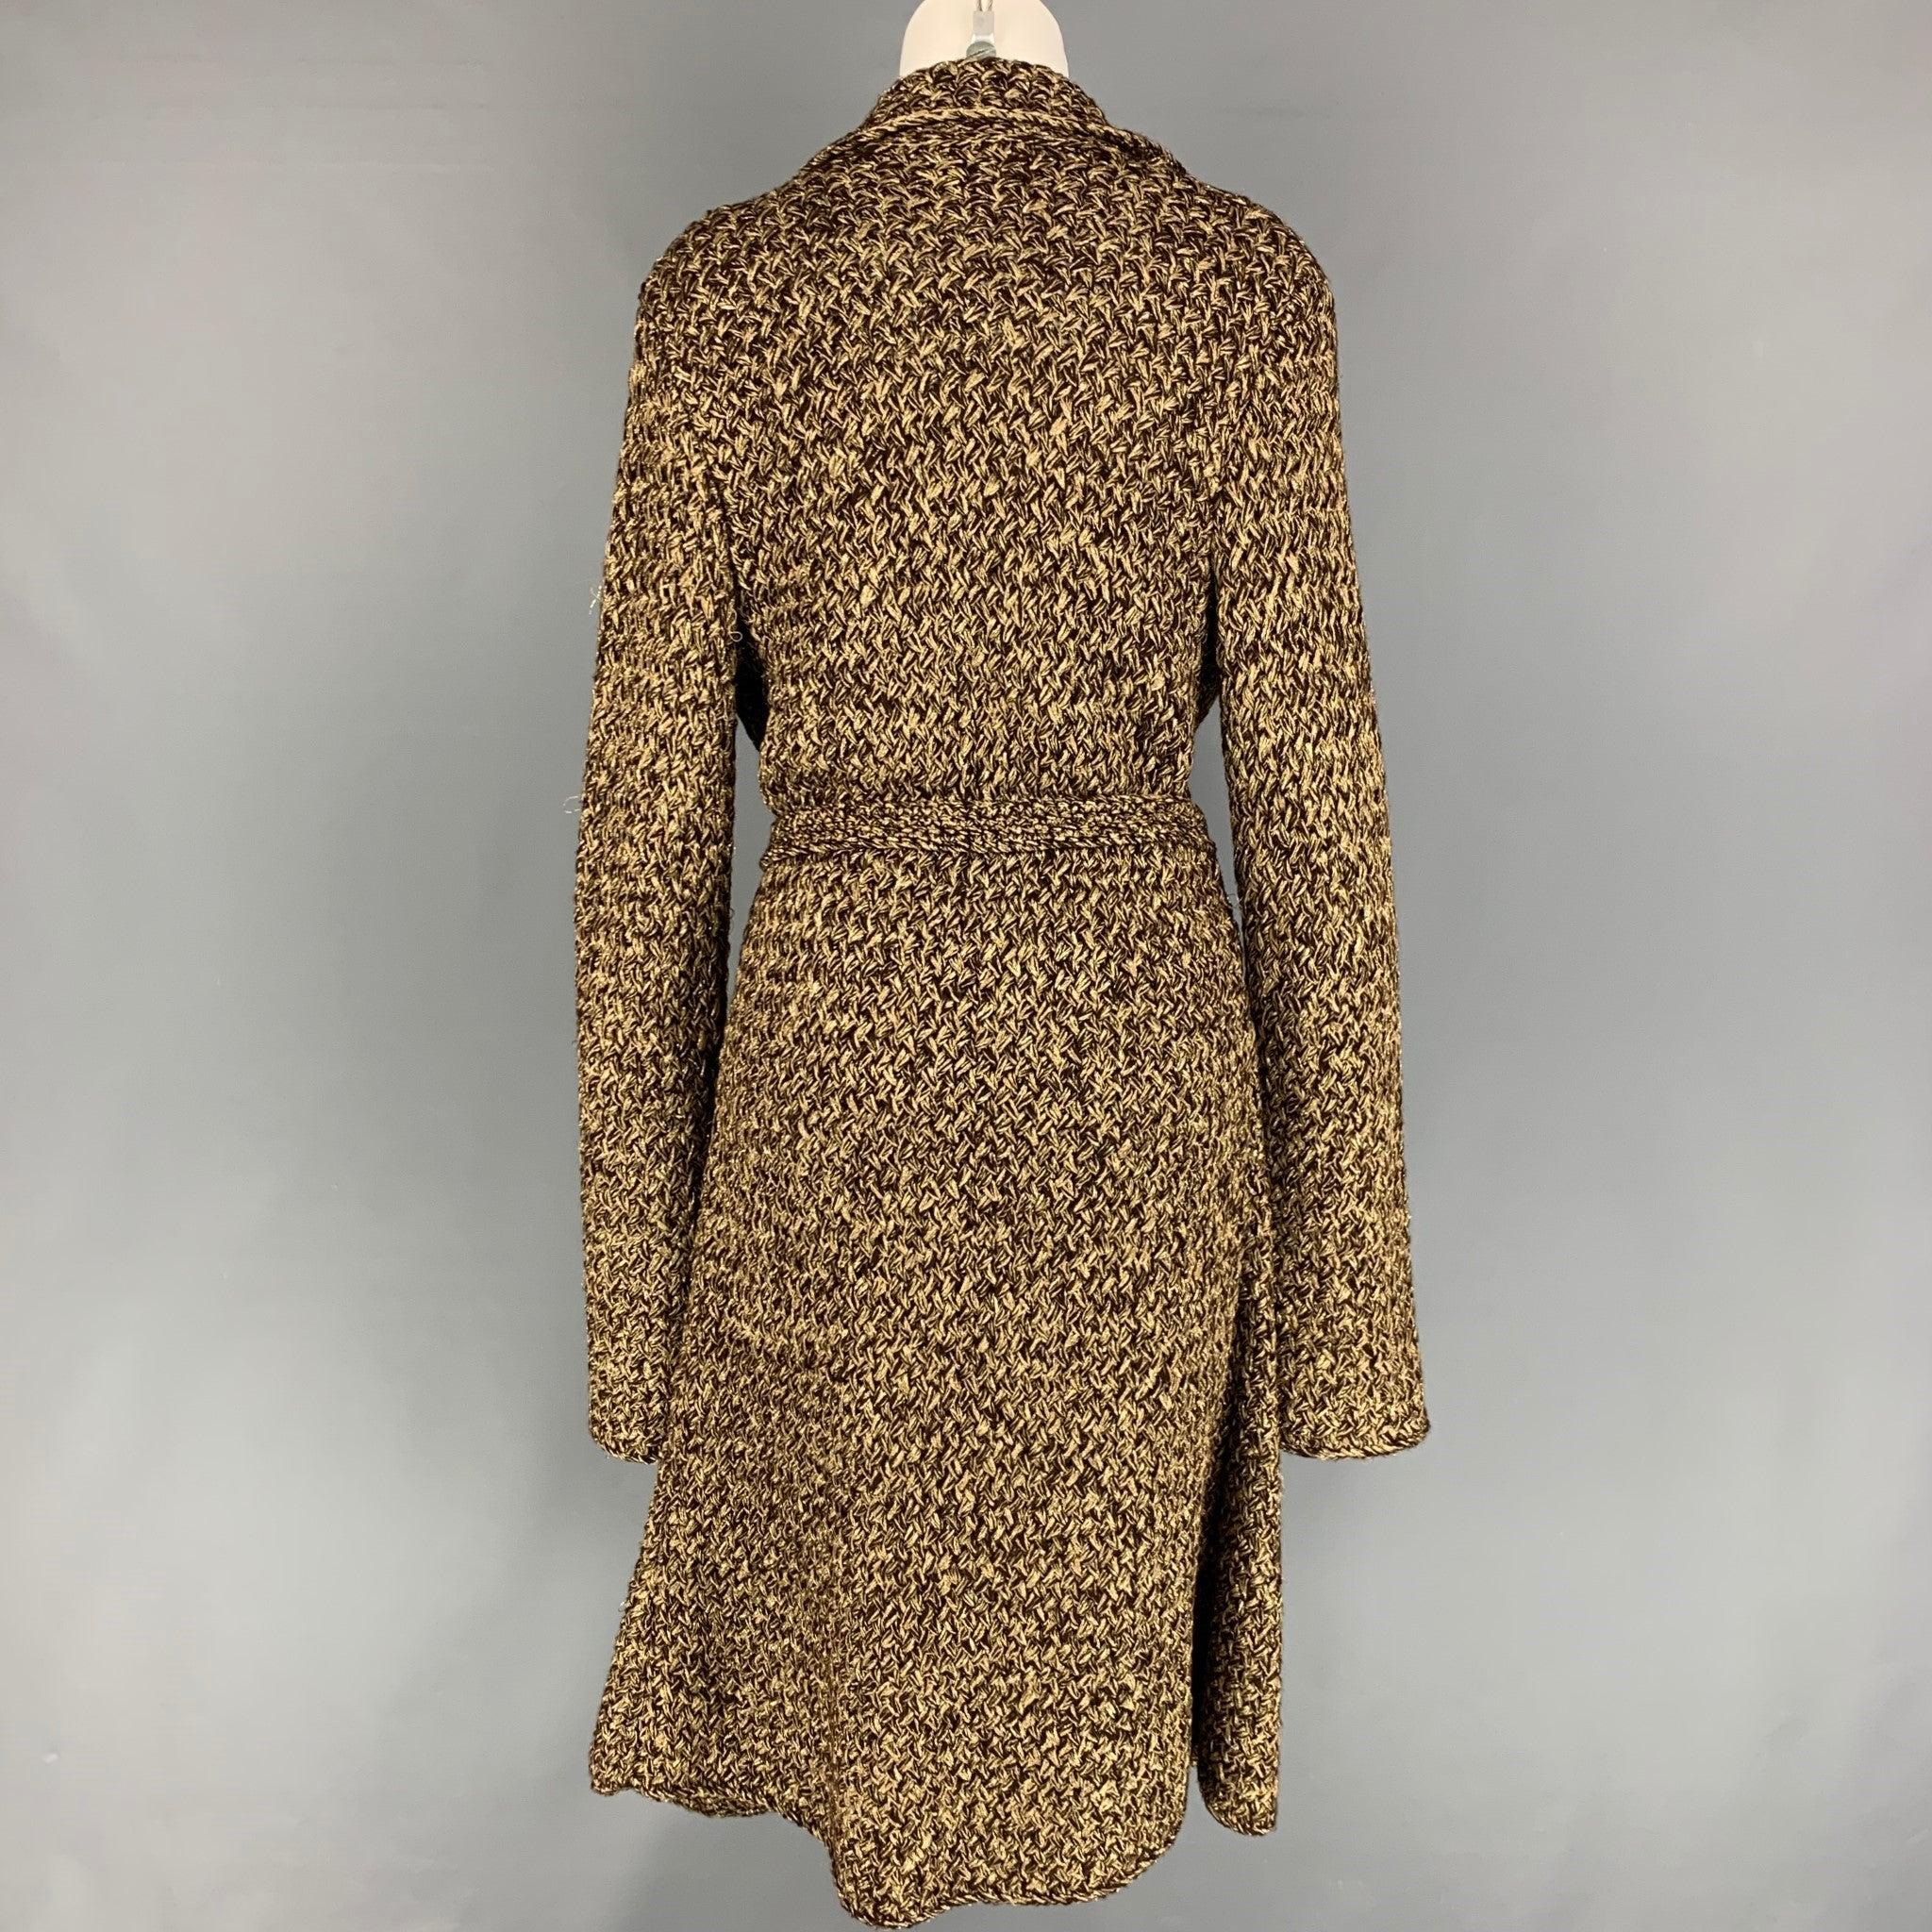 RALPH LAUREN Purple Label Size M Brown Gold Cashmere Blend Open Front Coat In Good Condition For Sale In San Francisco, CA